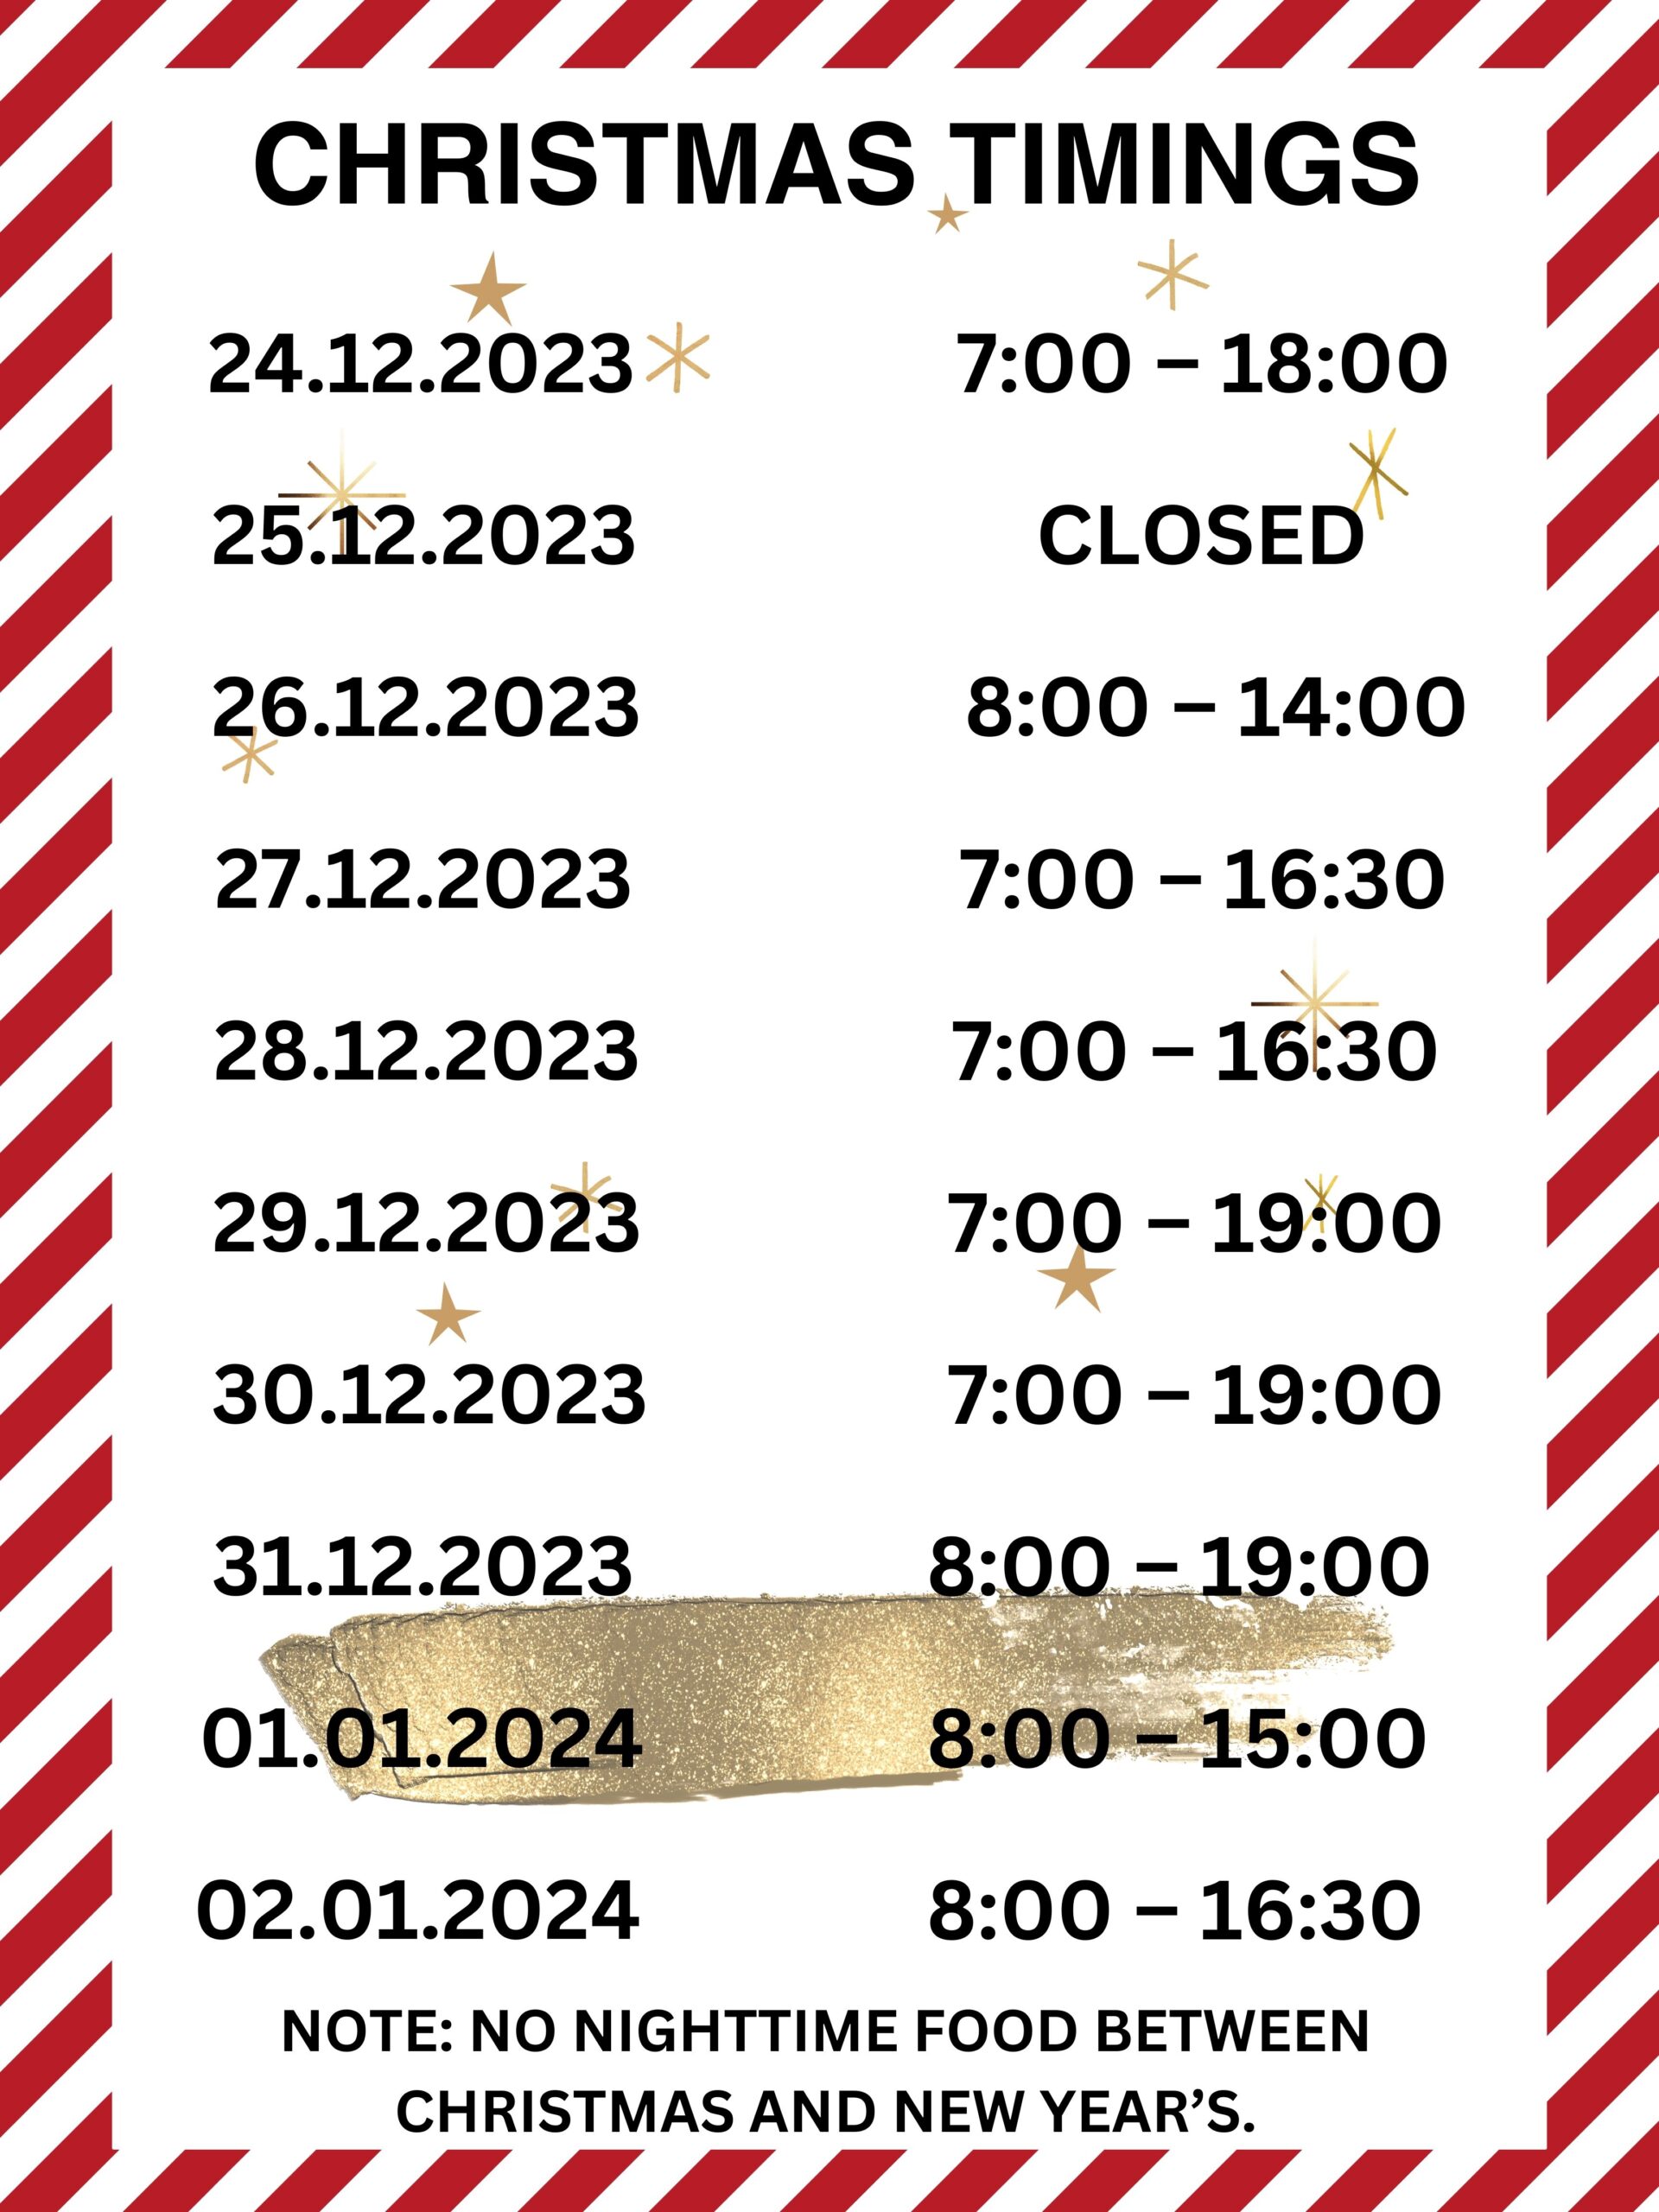 Found Hope Christmas timings